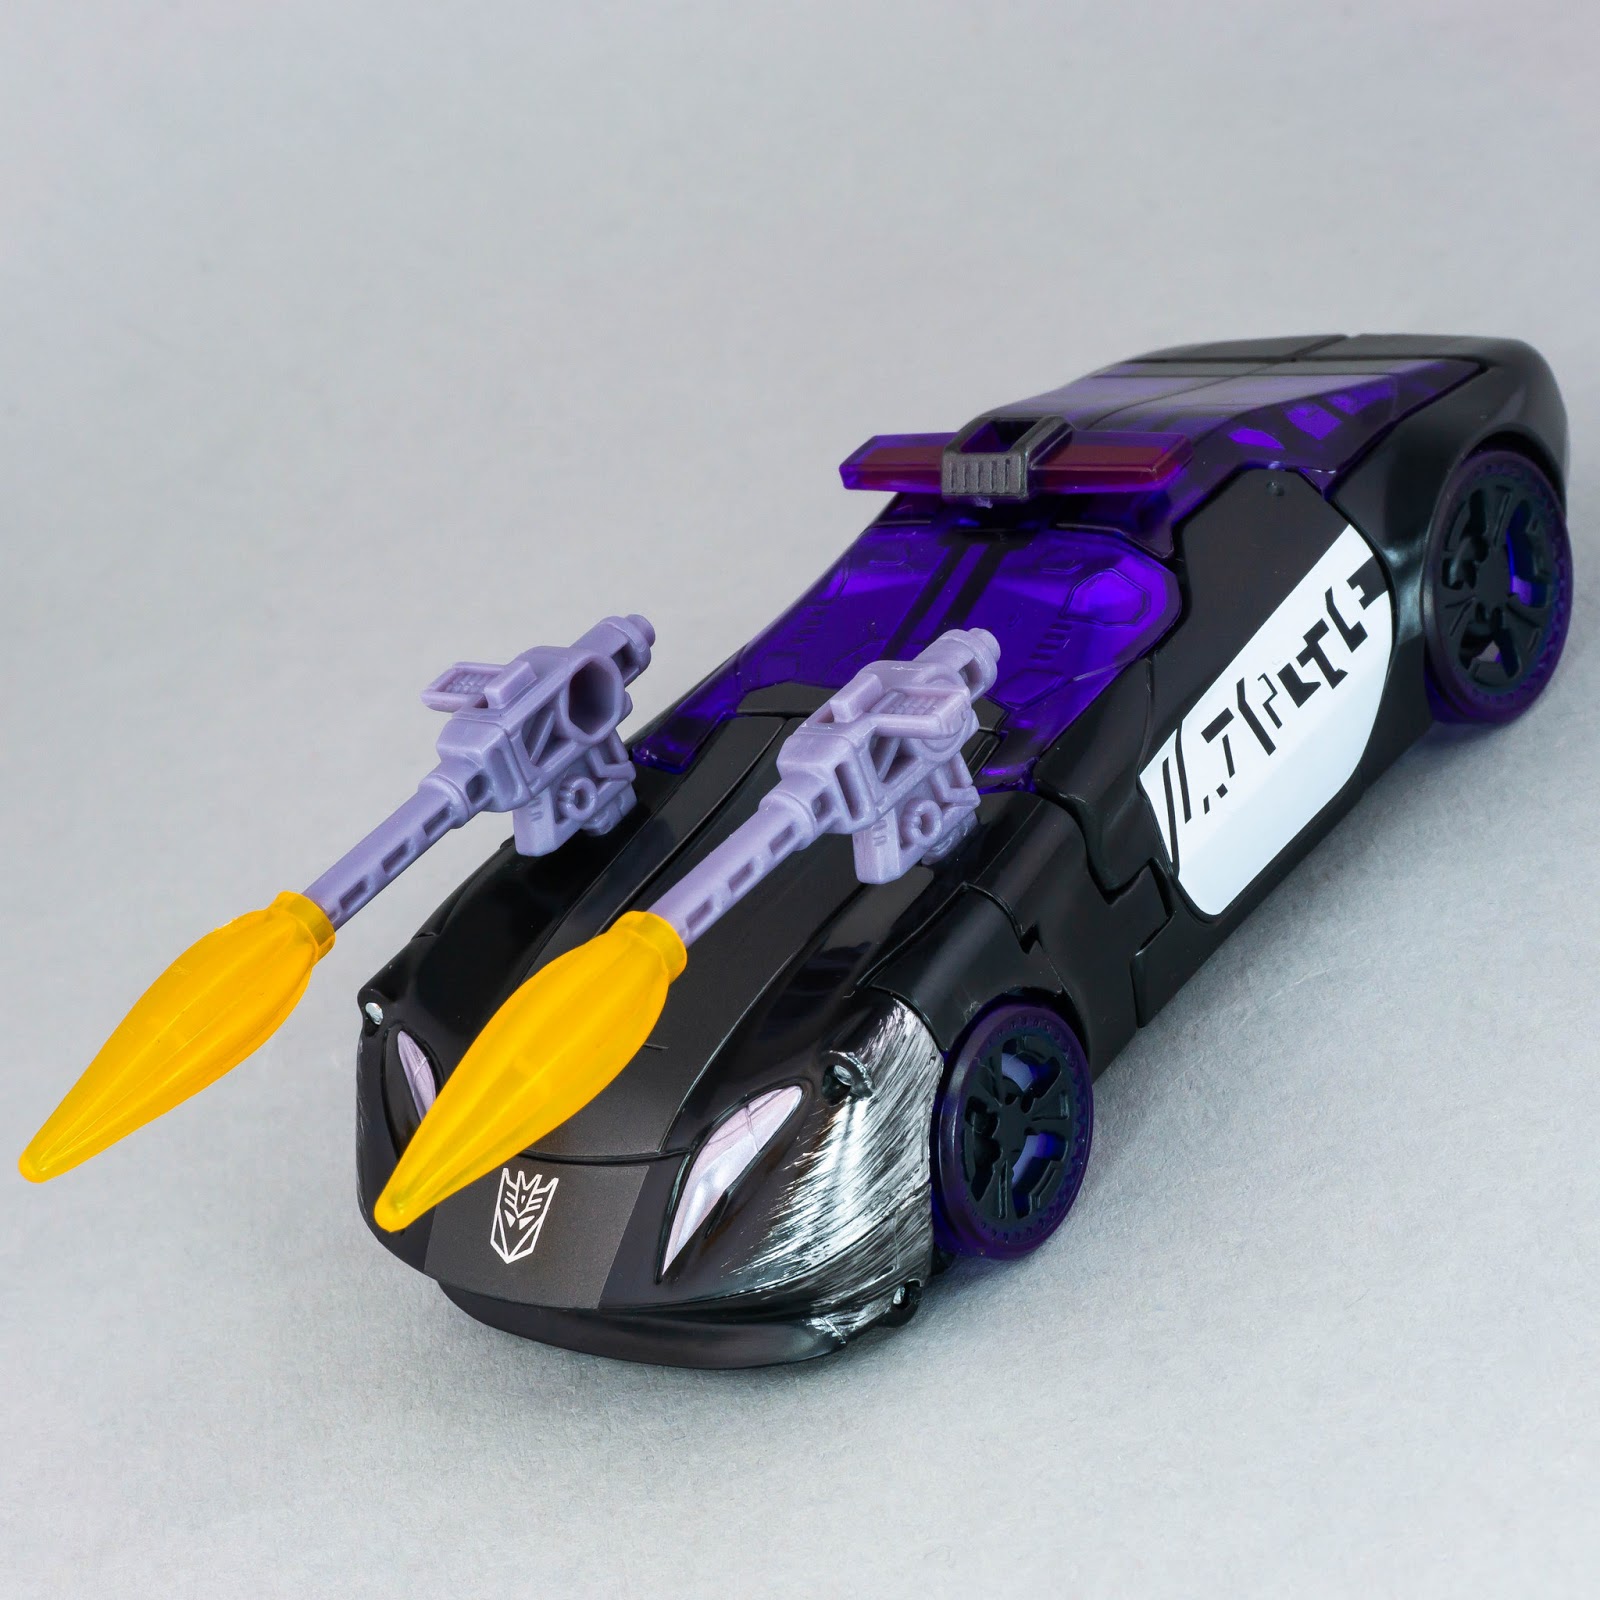 Transformers Siege Barricade police car mode with weapons 1